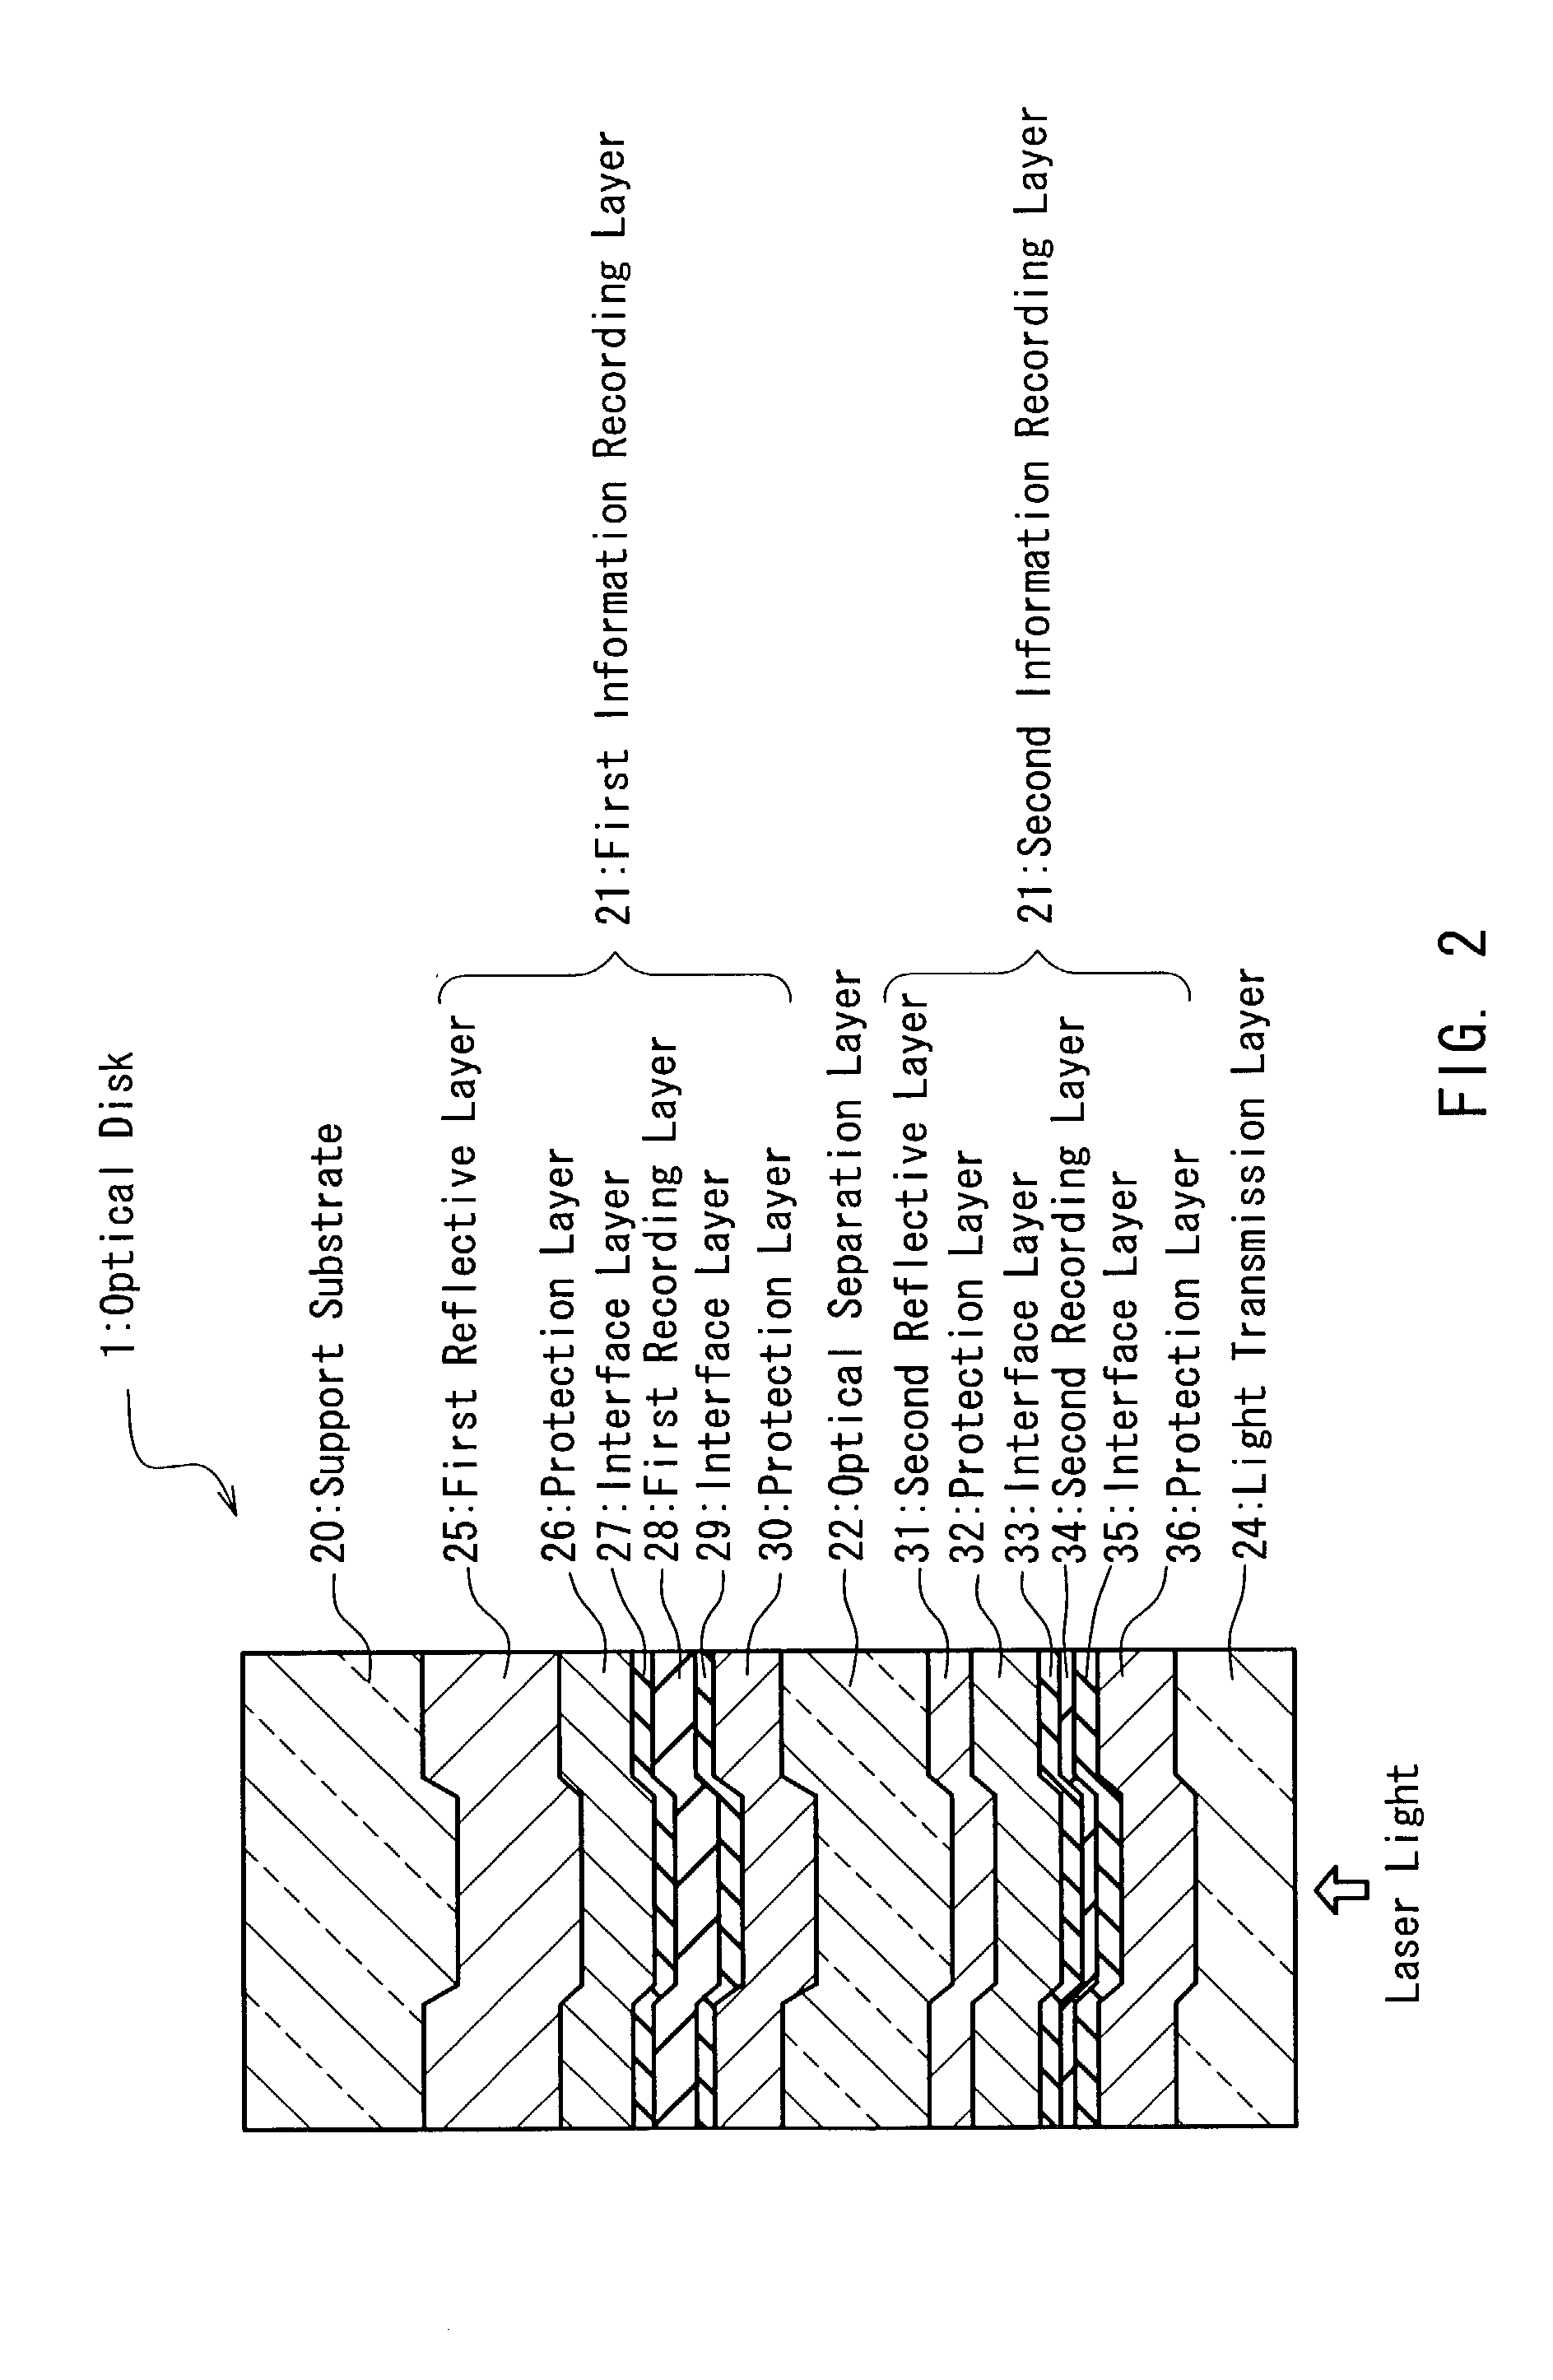 Optical information recording method, device, and recording medium with plural recording layers